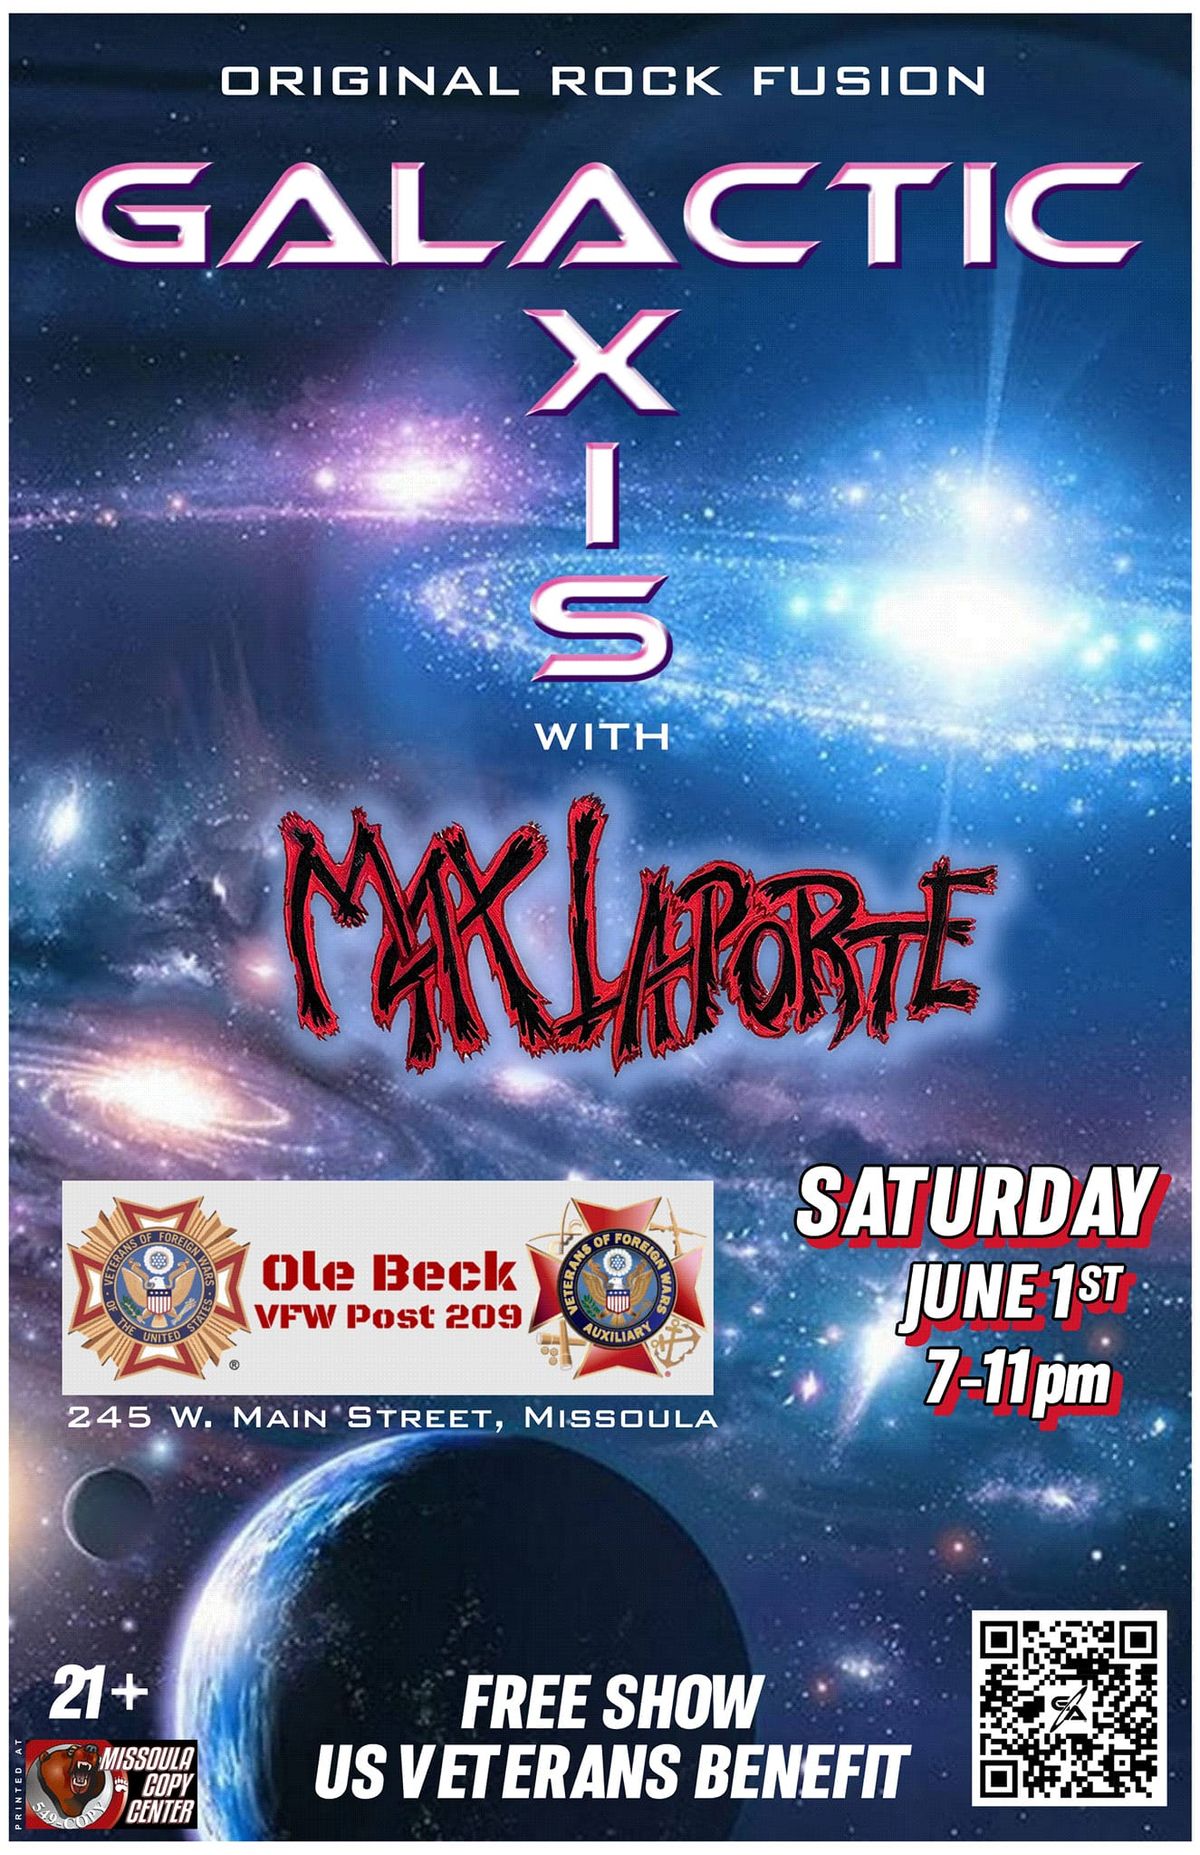 Free Show & Veterans Benefit: Galactic Axis with Max Laporte